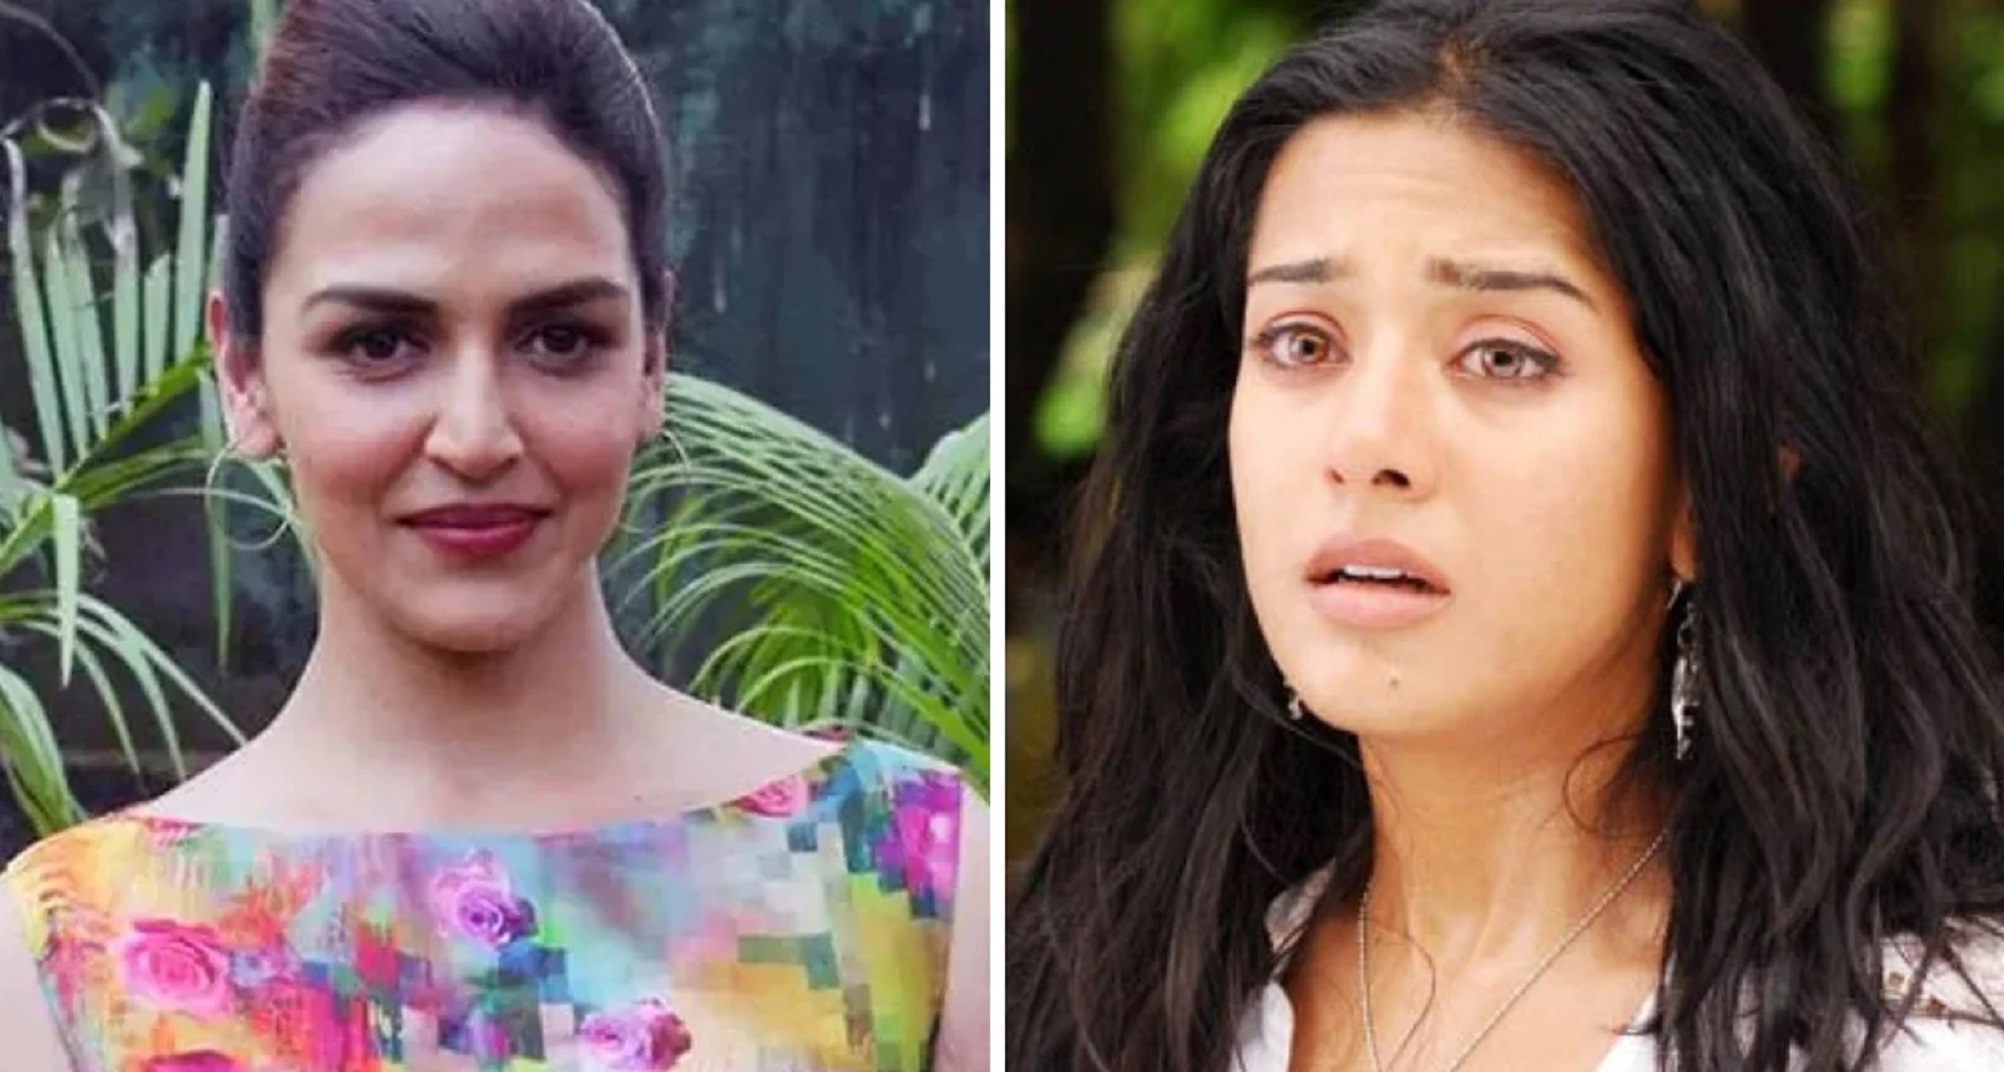 When Esha Deol SLAPPED Amrita Rao And Said “I have no regrets because she totally deserved it”